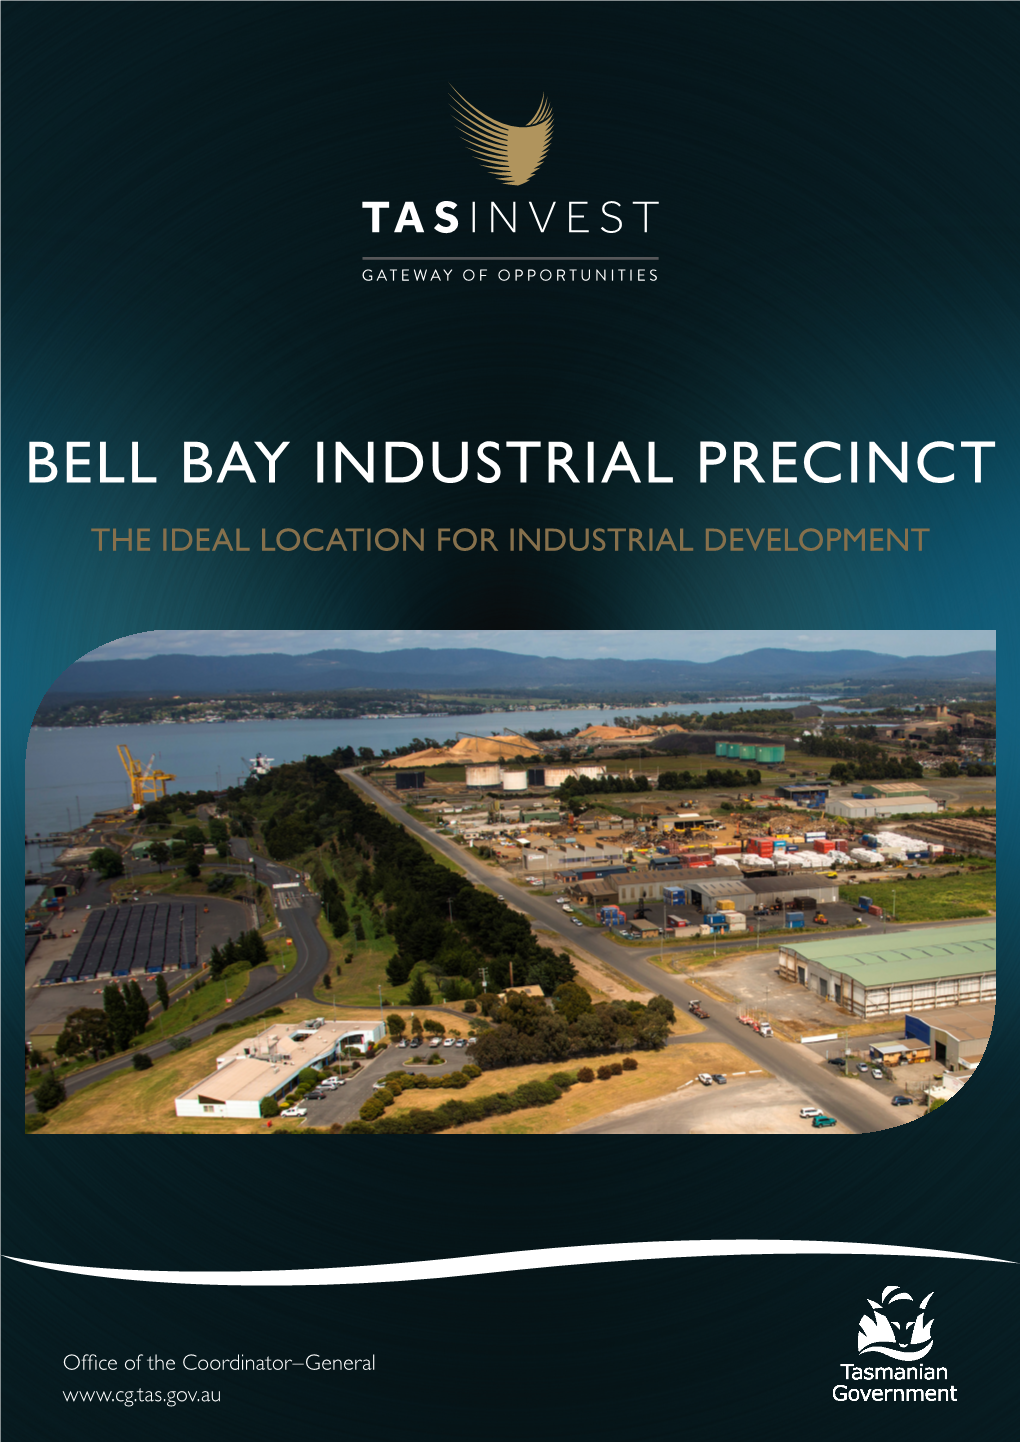 Bell Bay Industrial Precinct the Ideal Location for Industrial Development